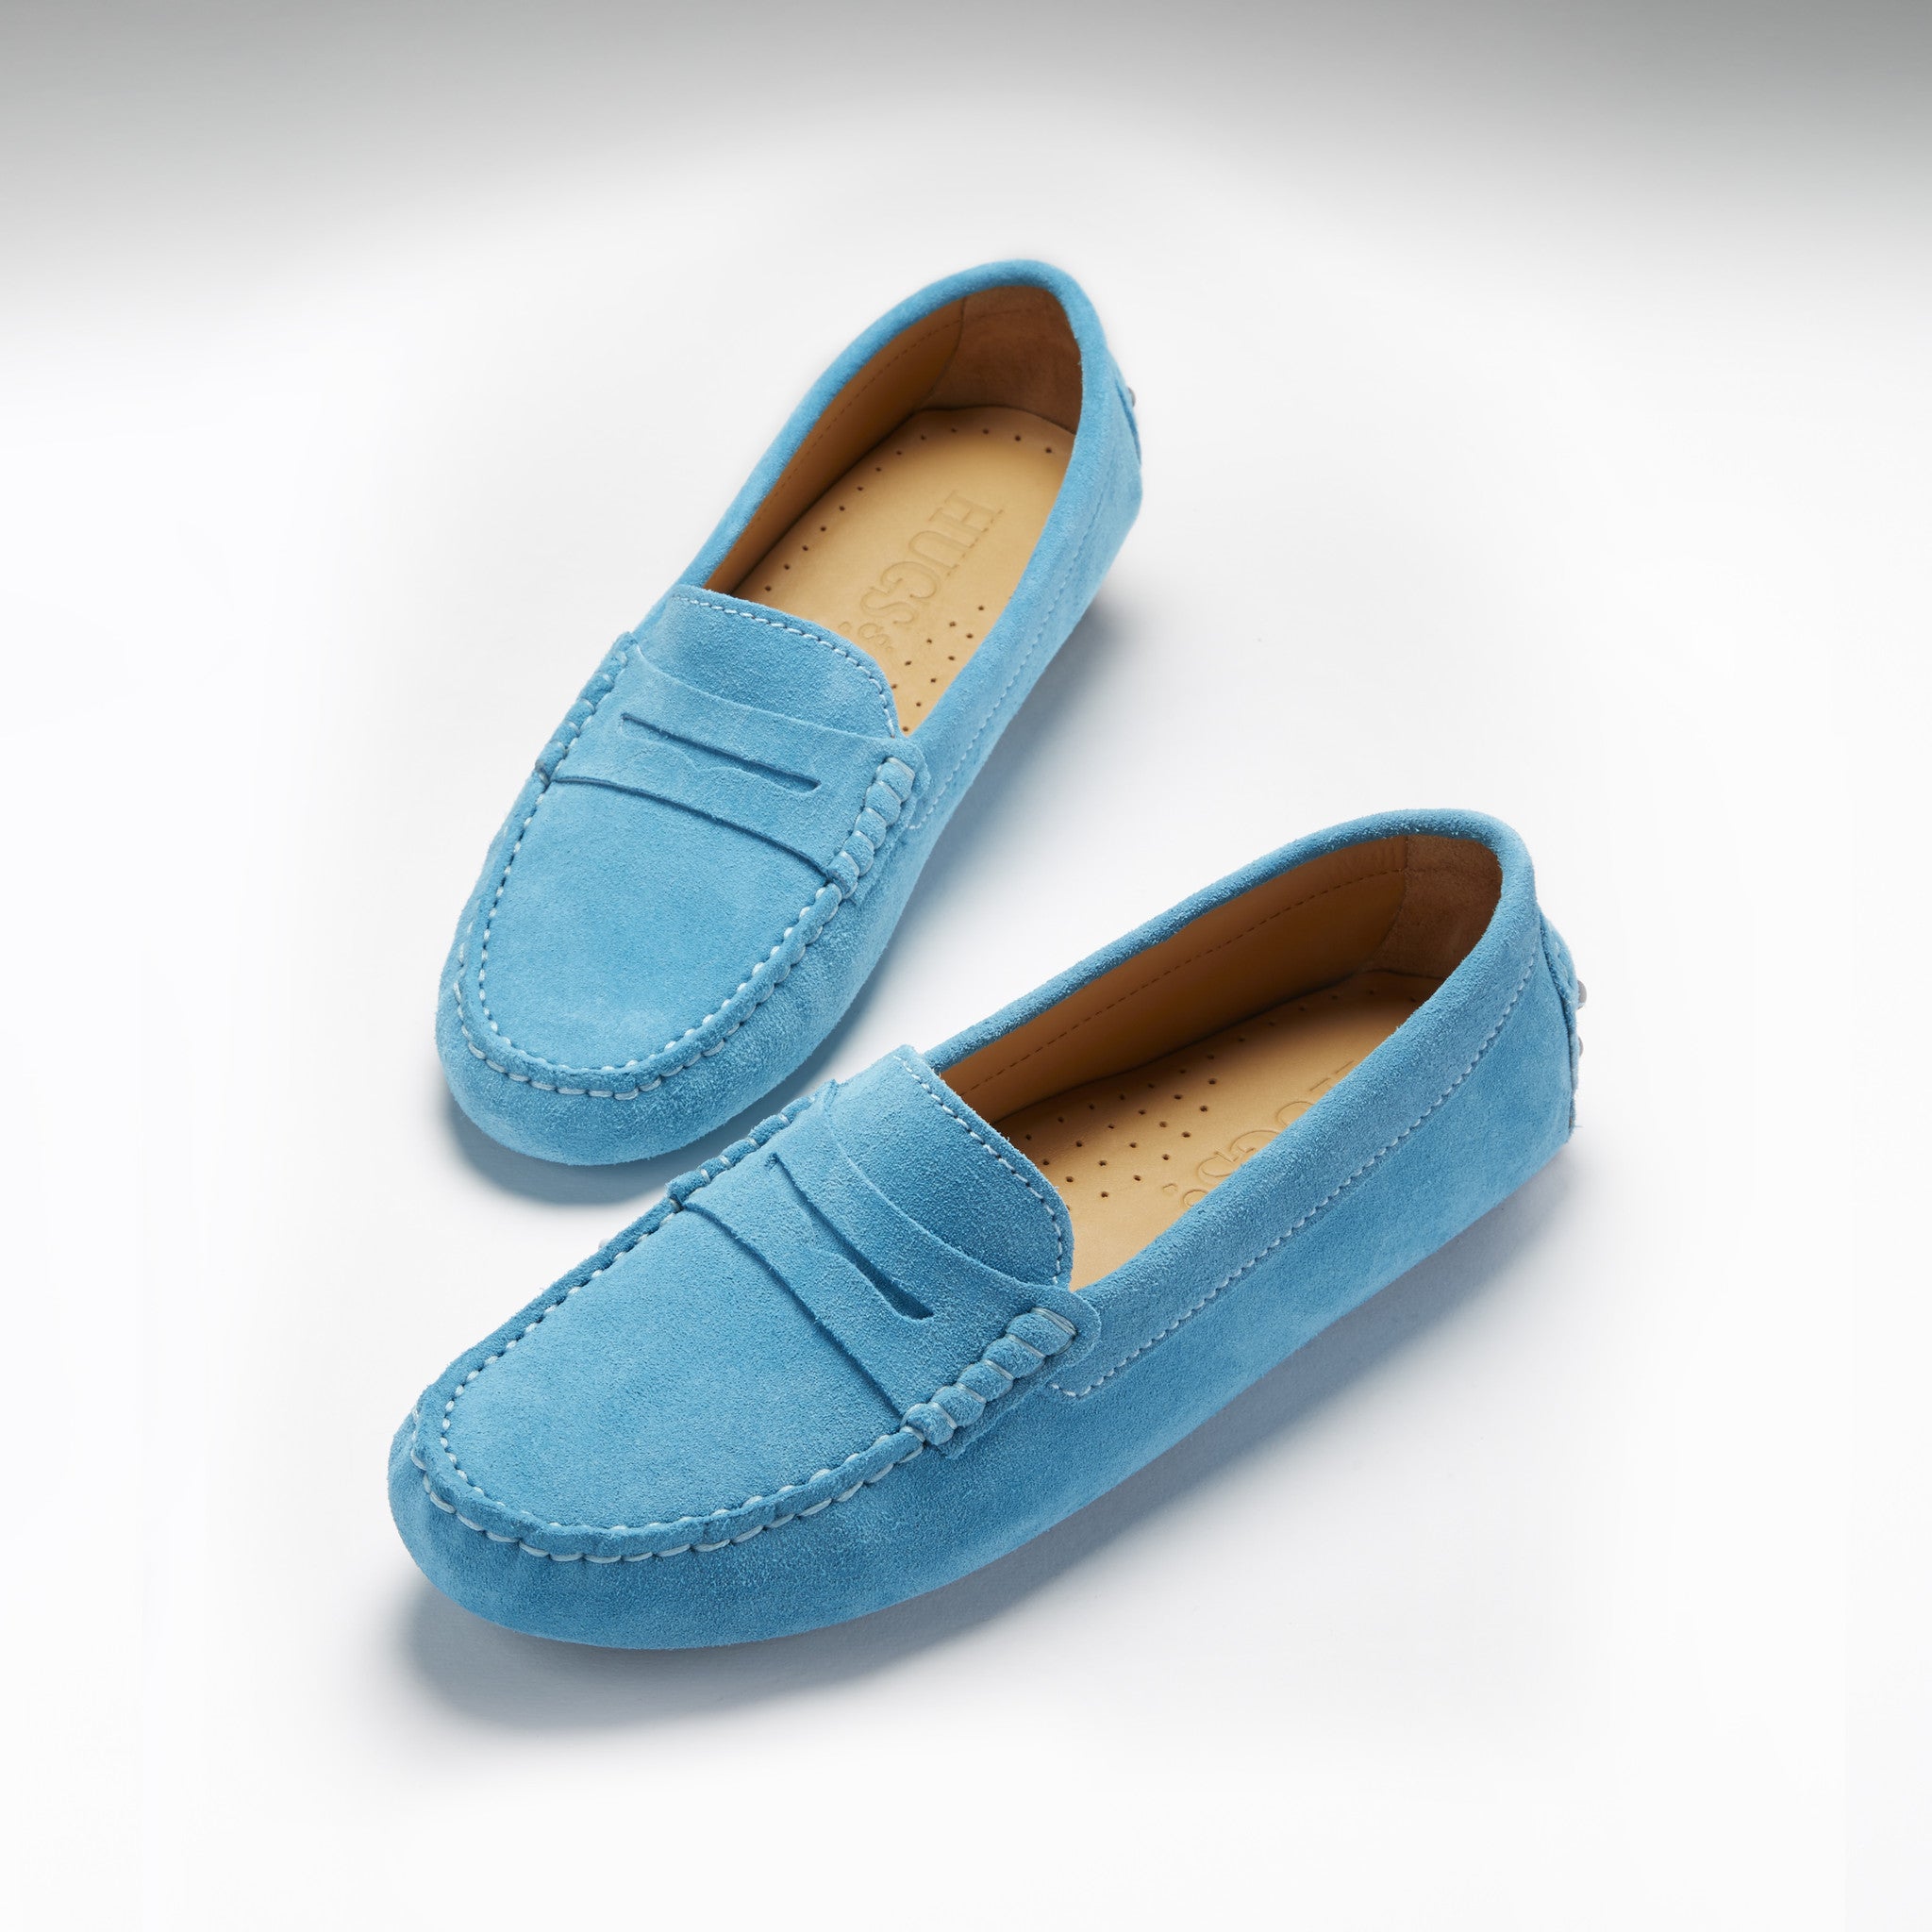 Women's Penny Driving Loafers, turquoise suede - Hugs & Co.